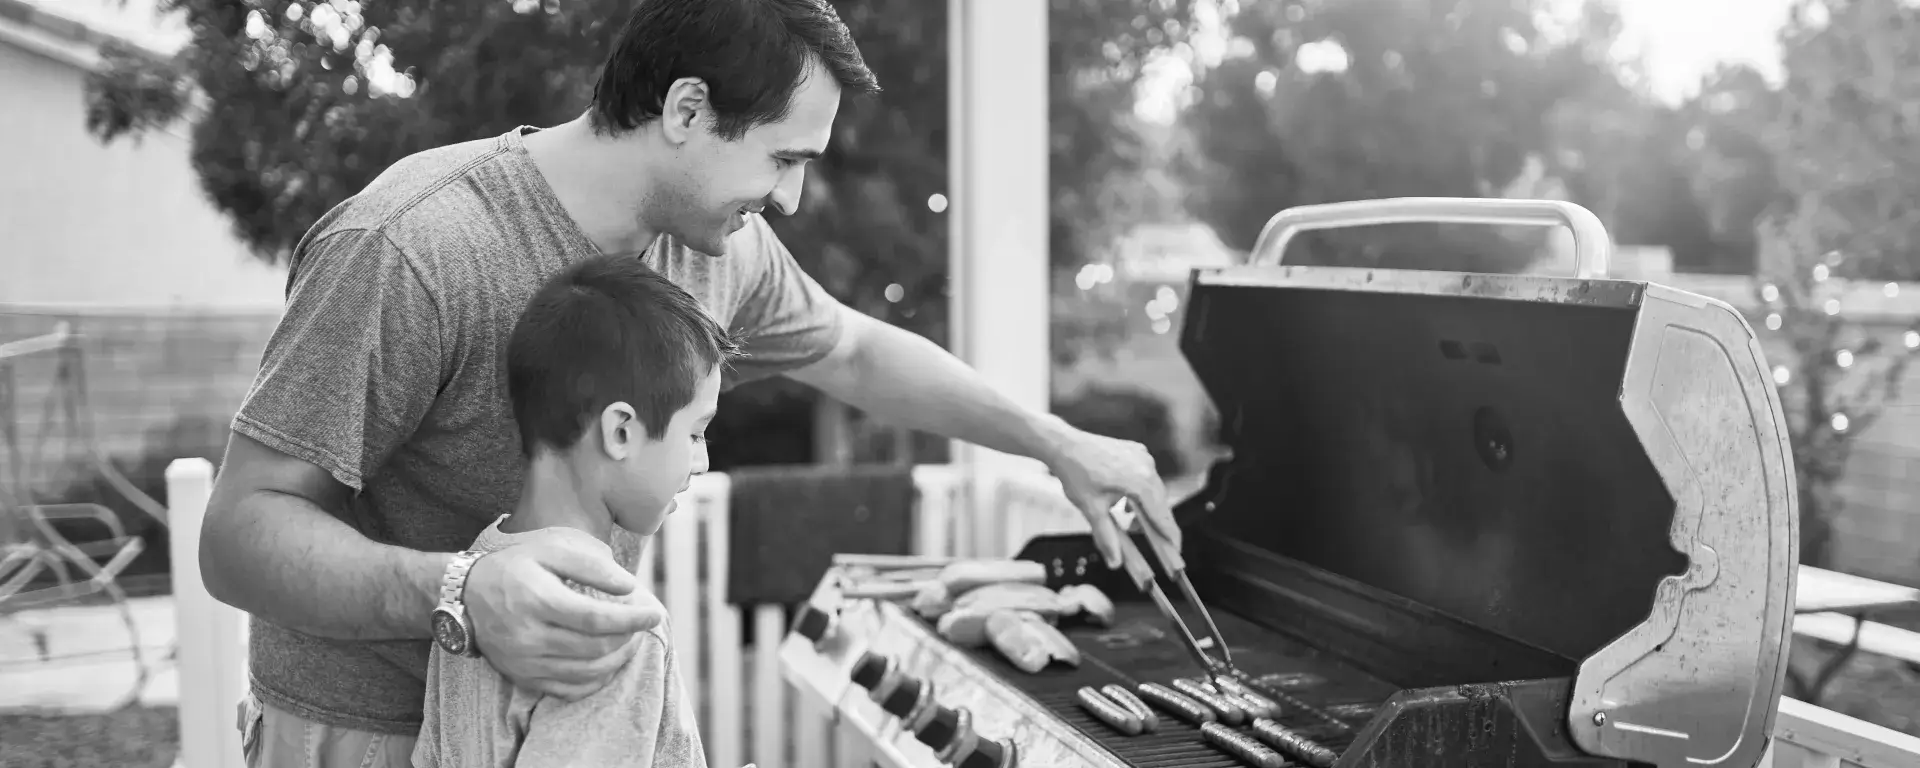 Father and son grilling